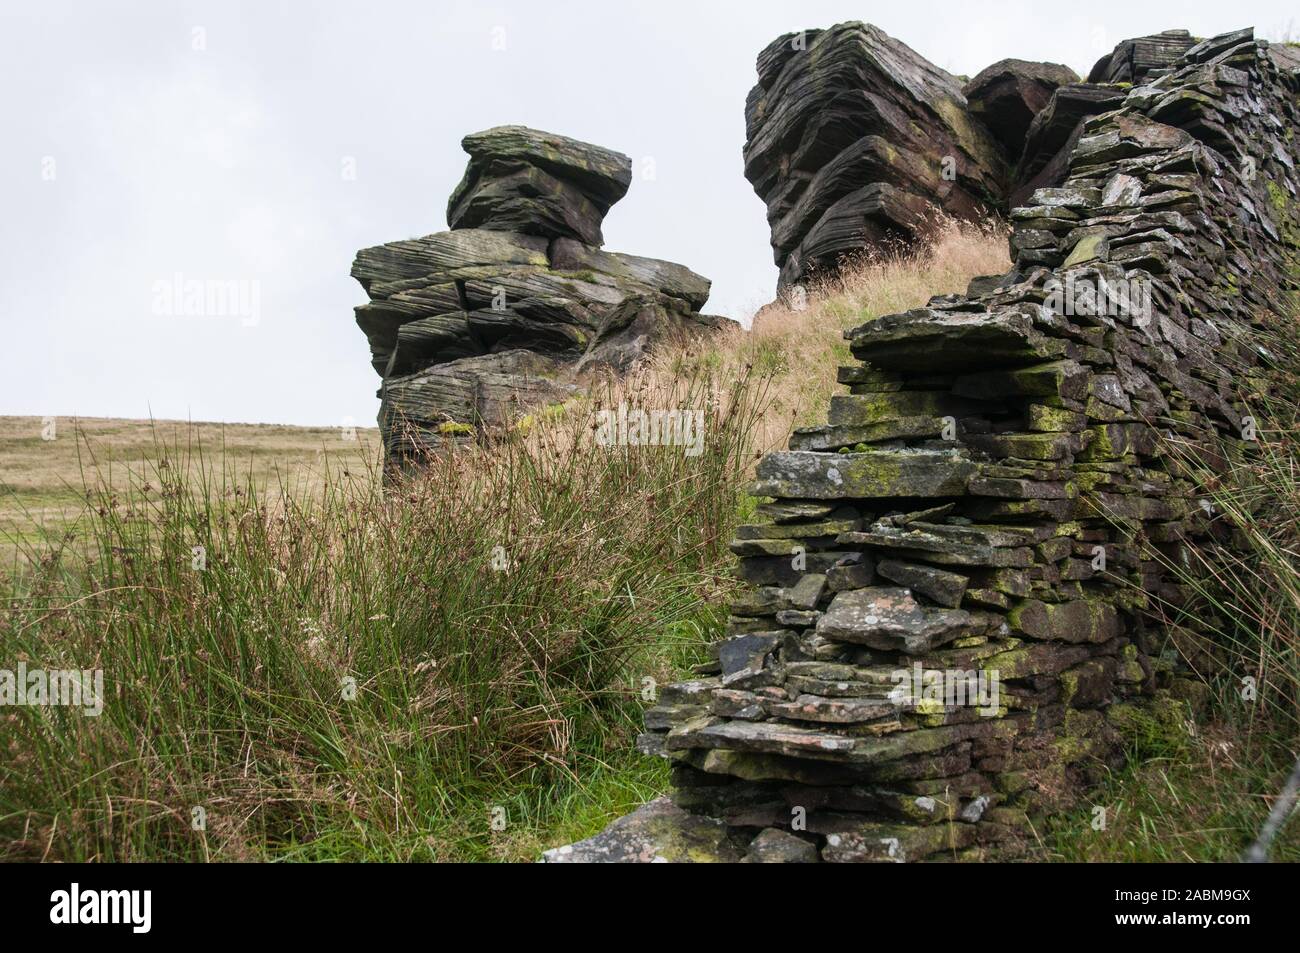 Around the UK - West Yorkshire On the moors above Todmorden. Wide vistas on what was a busy industrial area prior to the industrial revolution. Stock Photo